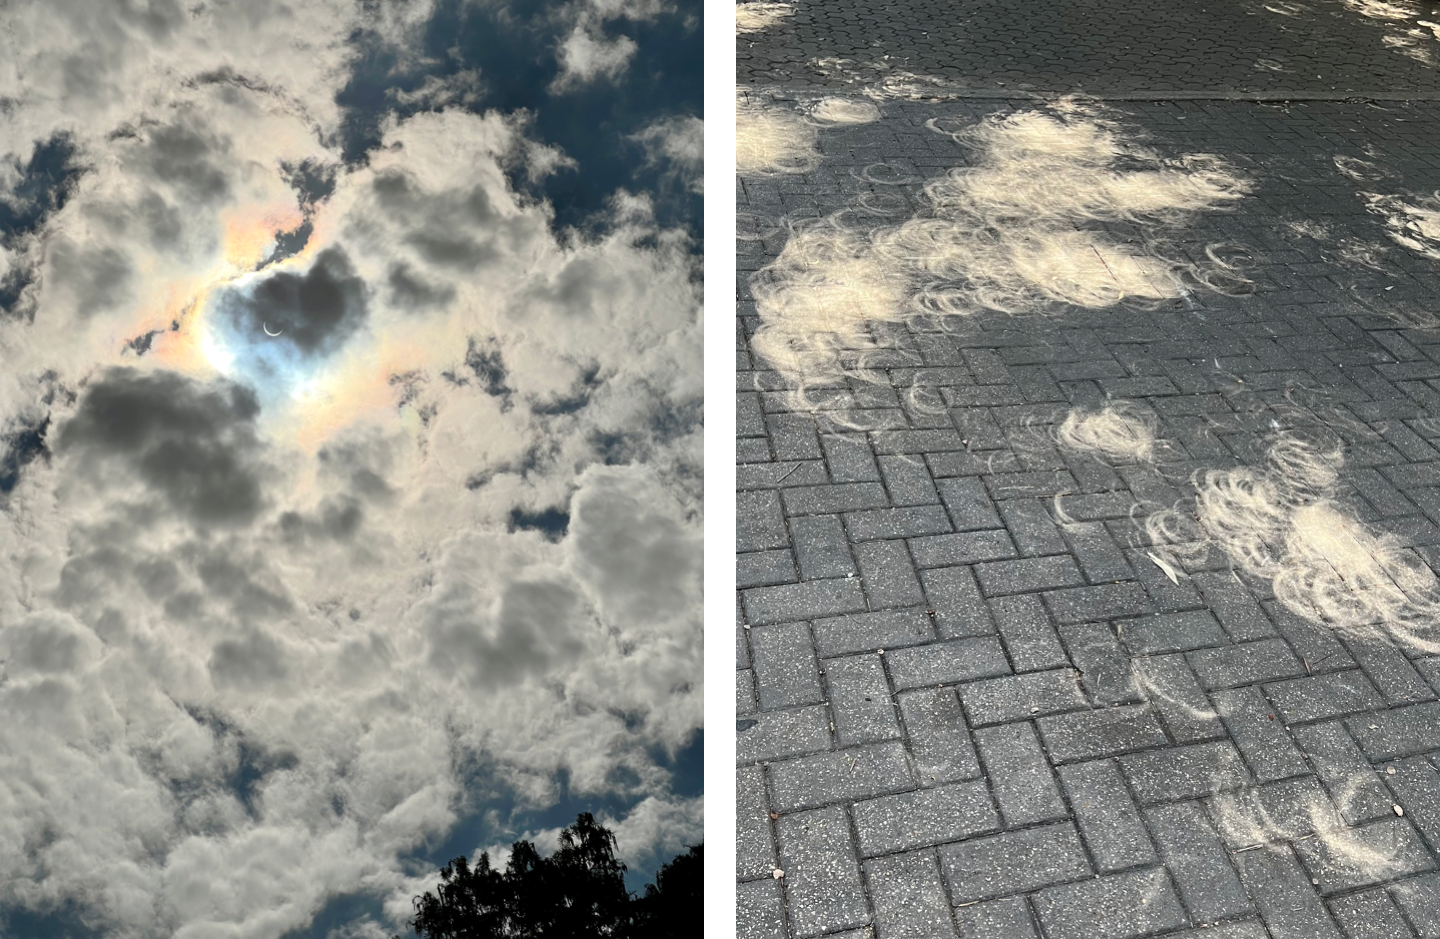 Left: A layer of clouds with a small gap allowing the crescent of a partial eclipse to be visible. Right: Many overlapping crescents of a partial eclipse filtering through leaves and visible on a walkway of herringbone pattern bricks.